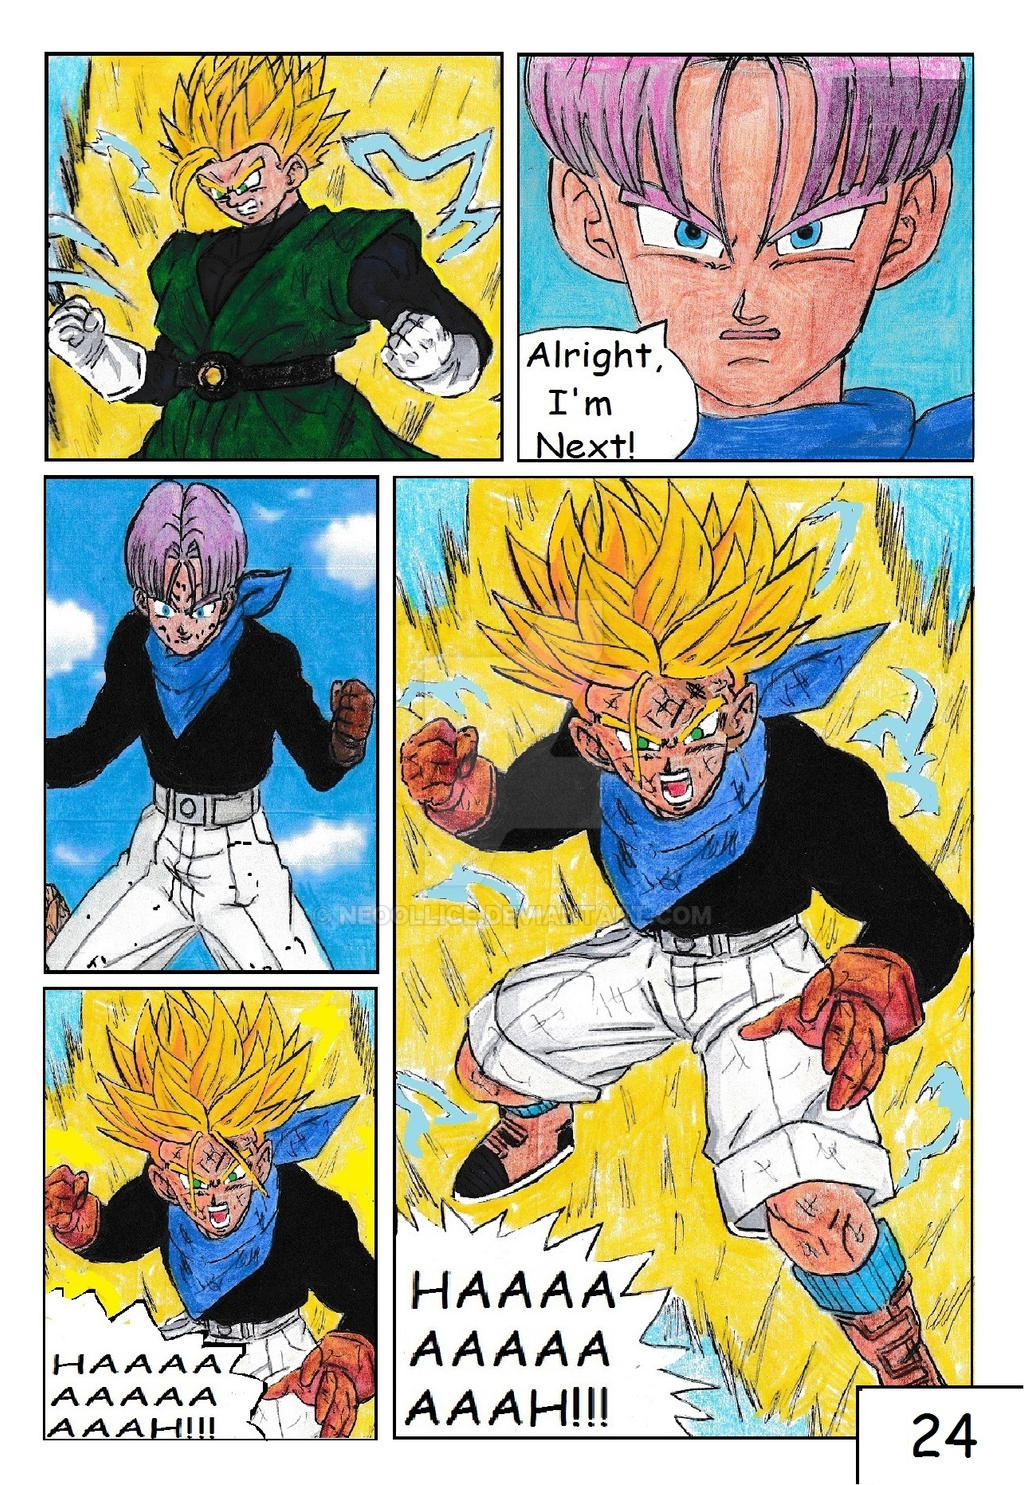 Dragon Ball SF Volume 2 Page 39 by NeoOllice on DeviantArt